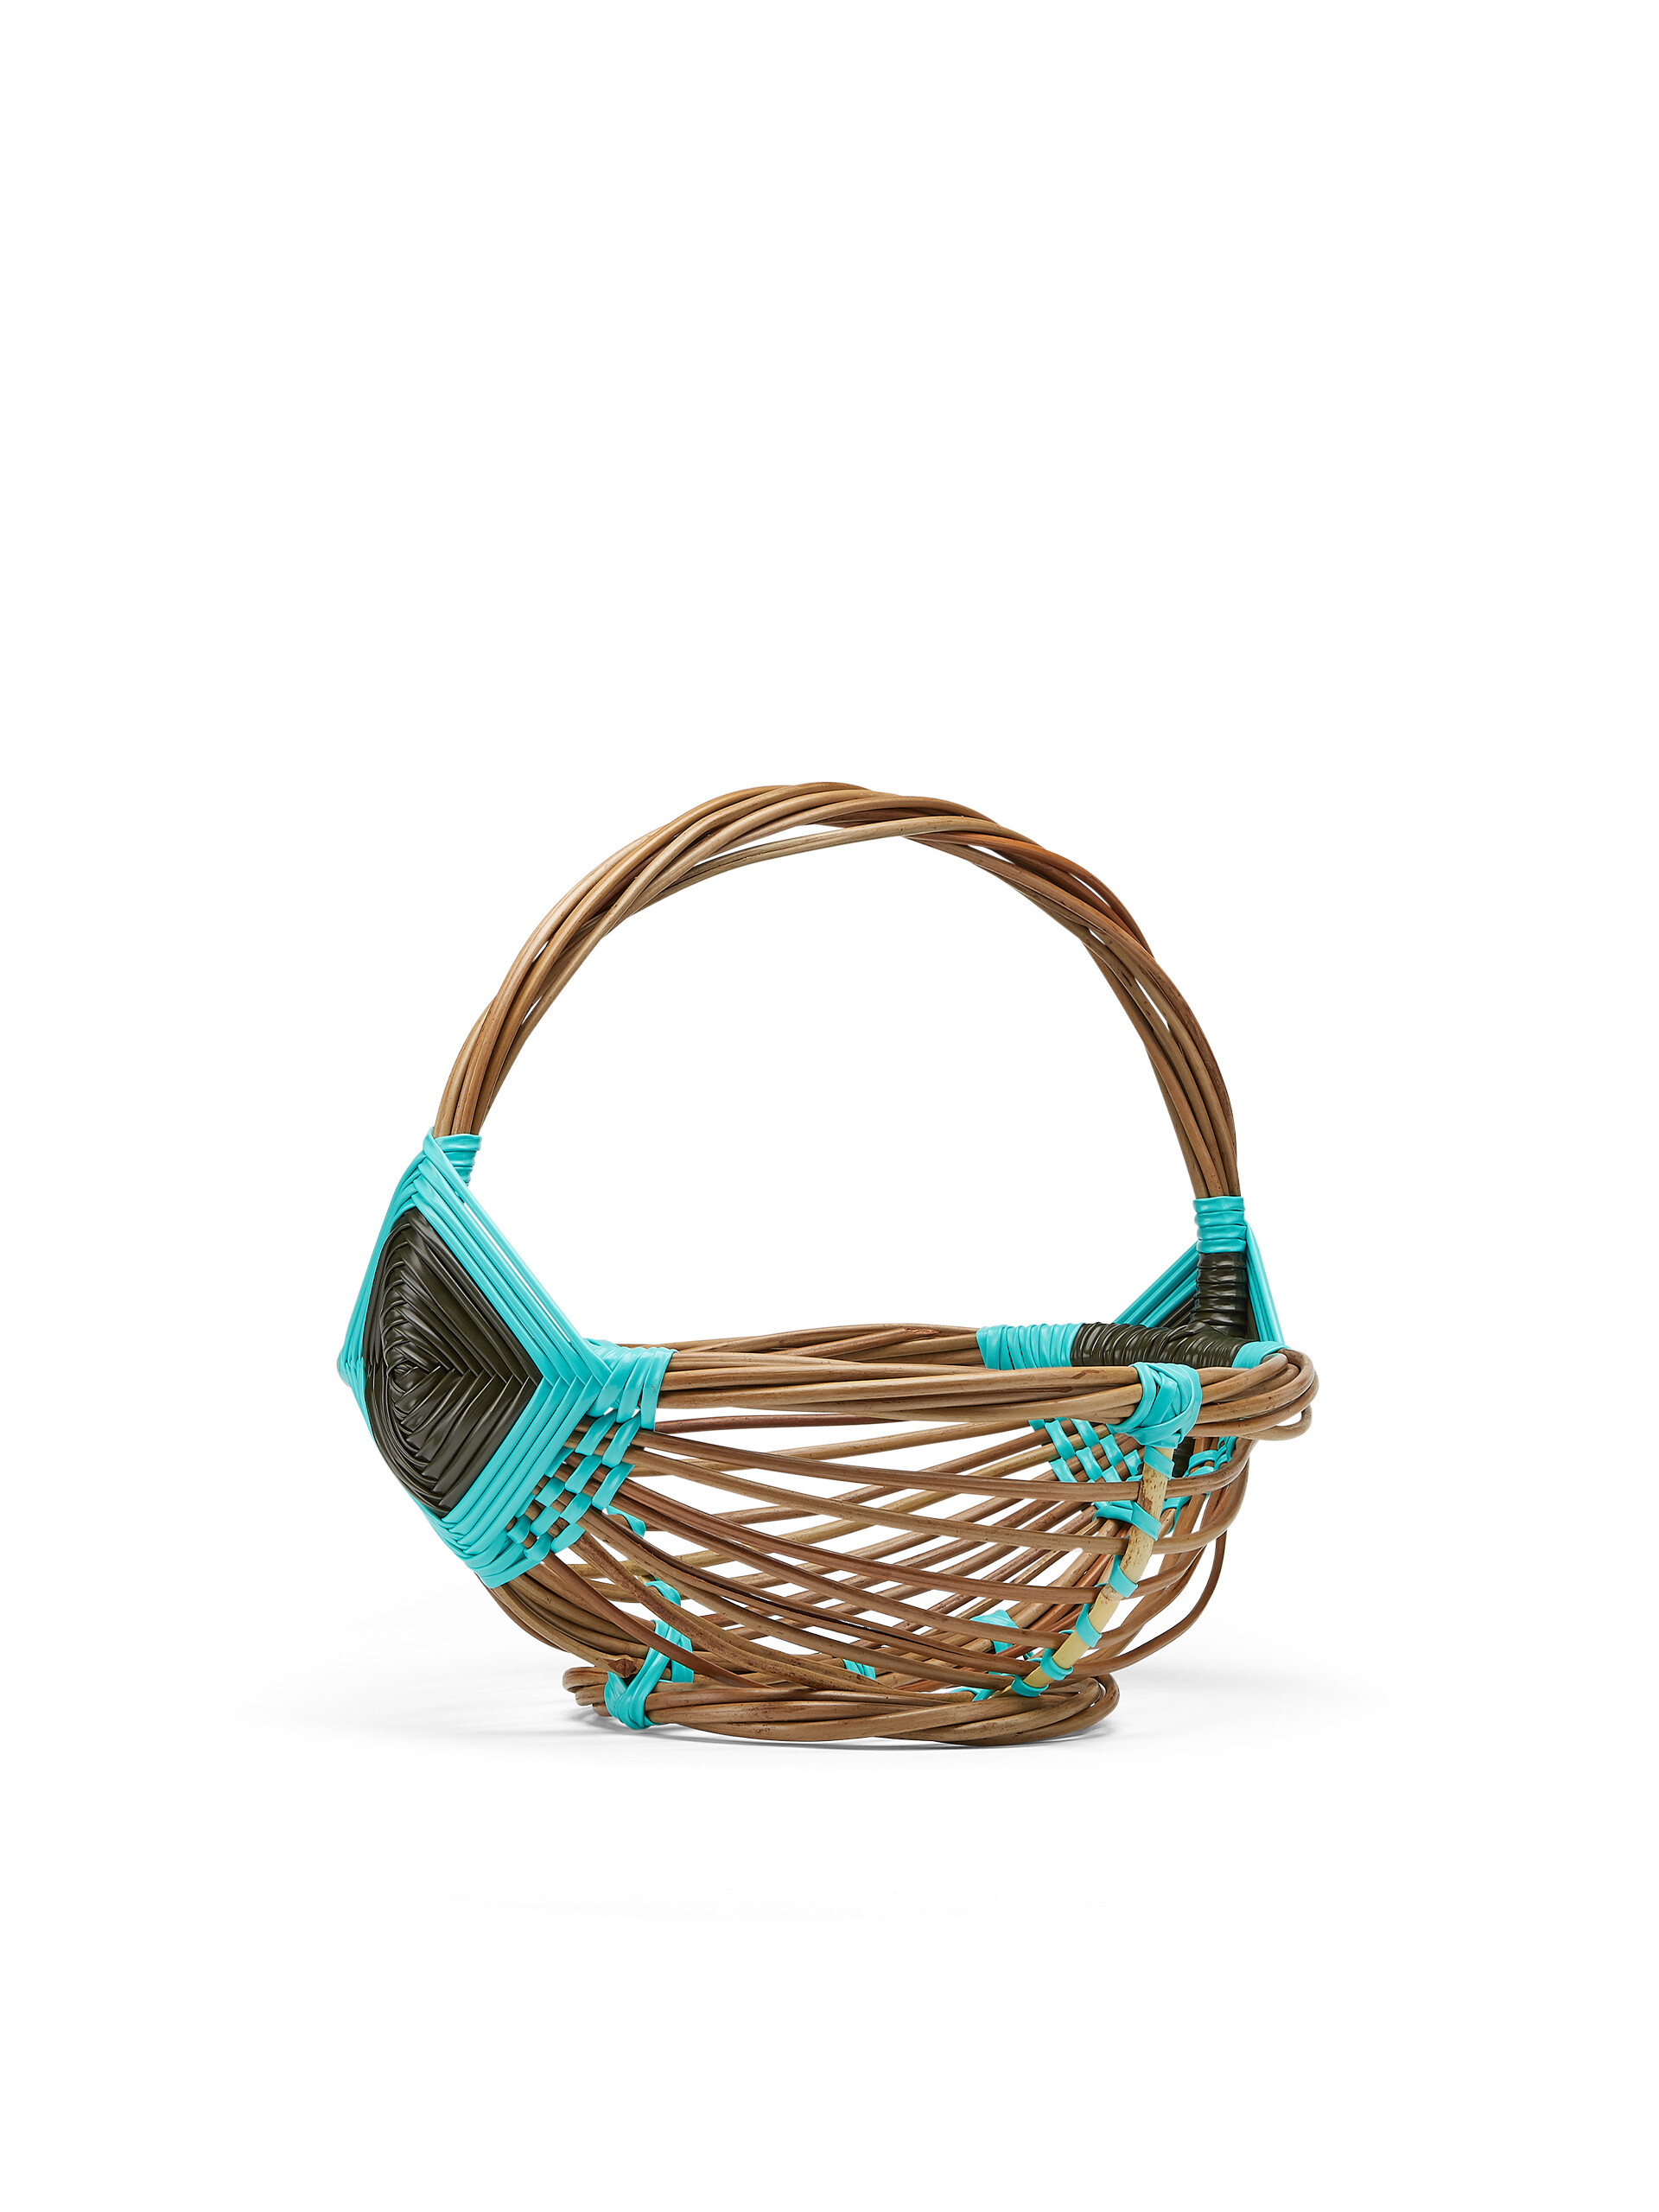 MARNI MARKET large fruit basket in natural fibre and PVC - Accessories - Image 2